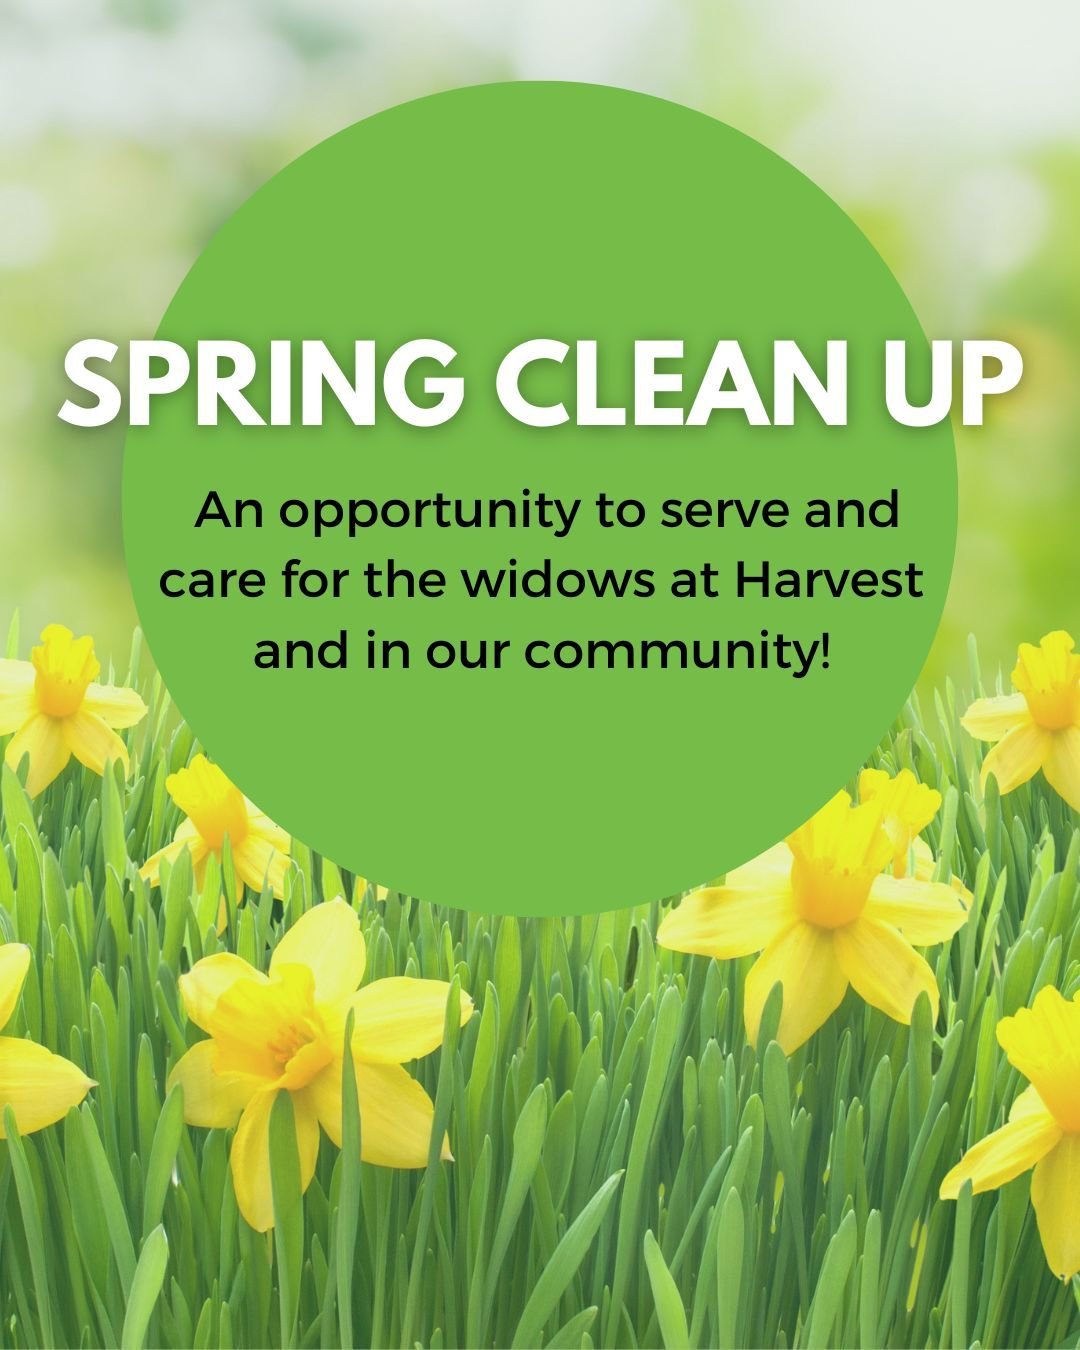 What a joy it is to serve and care for the widows at Harvest and in our community! If you would like to be a part of this opportunity, please sign up in our events! If you are a widow in need of a little help around your home this spring, you can sig